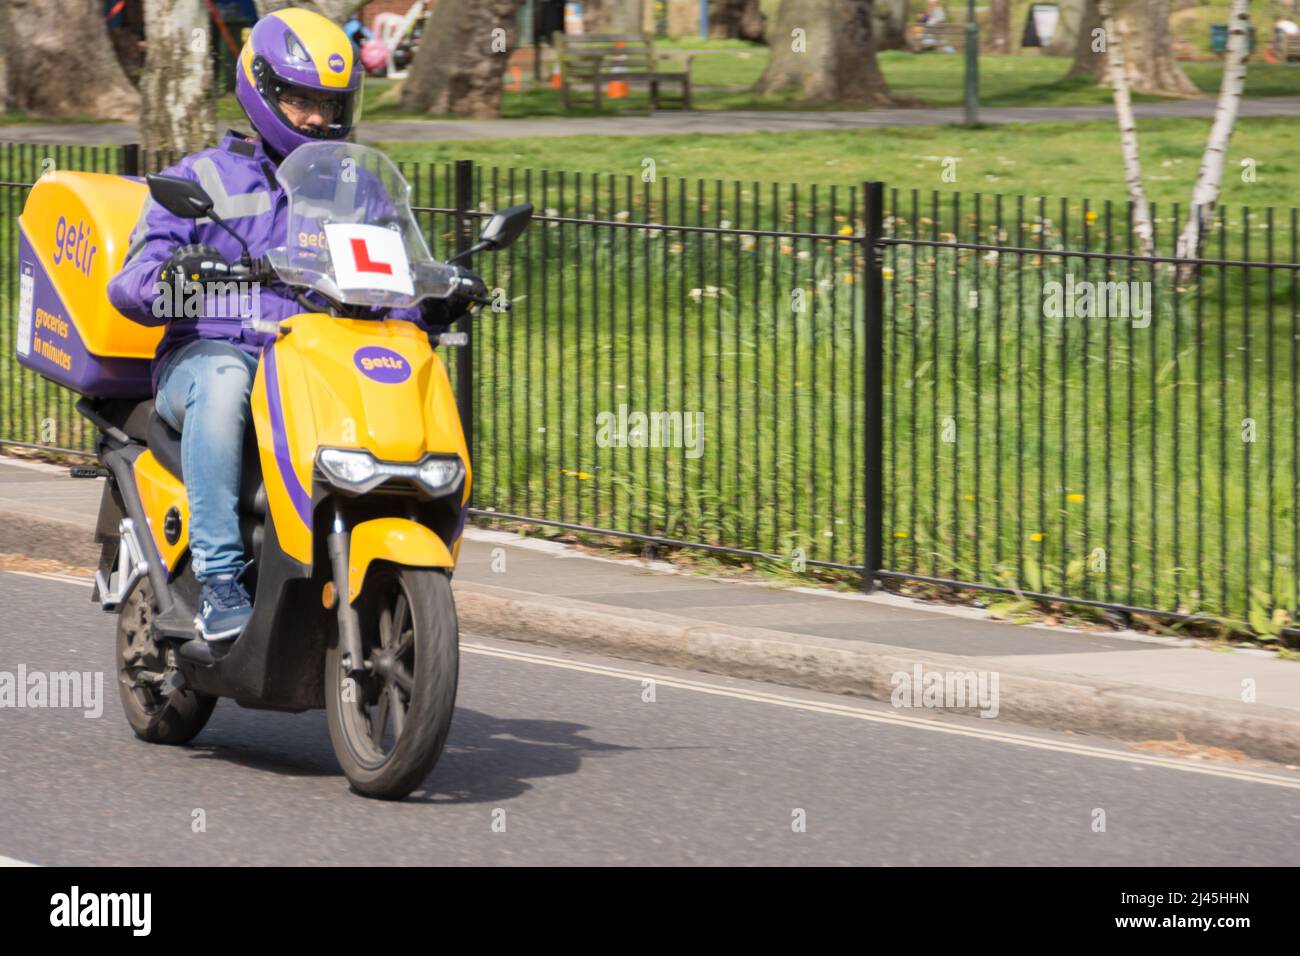 Getir ultrafast delivery driver delivering groceries on an e-scooter Stock Photo